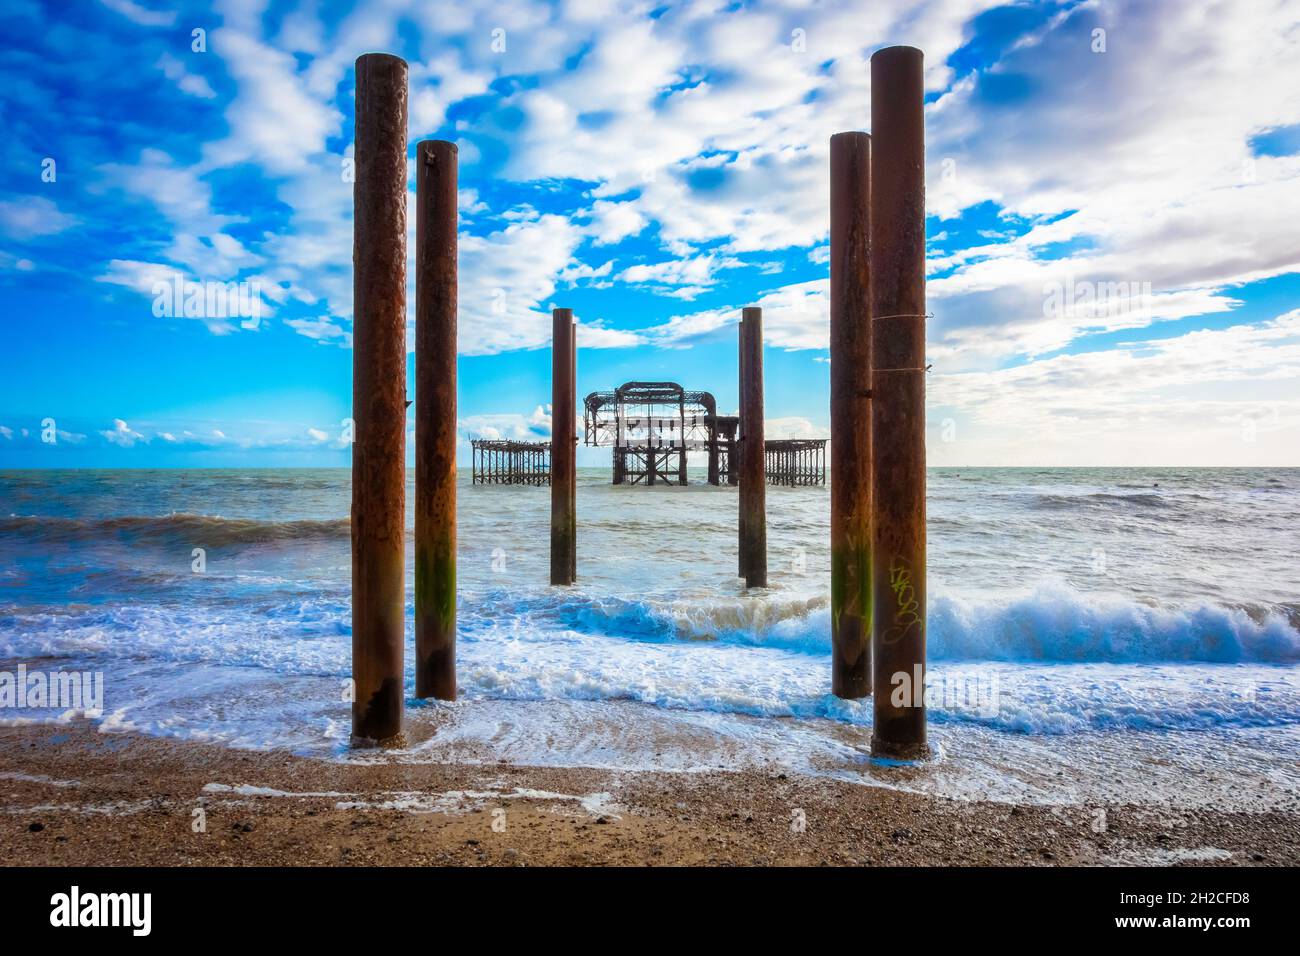 Wide angle image of Brighton west pier with cast iron pillars in the foreground Stock Photo